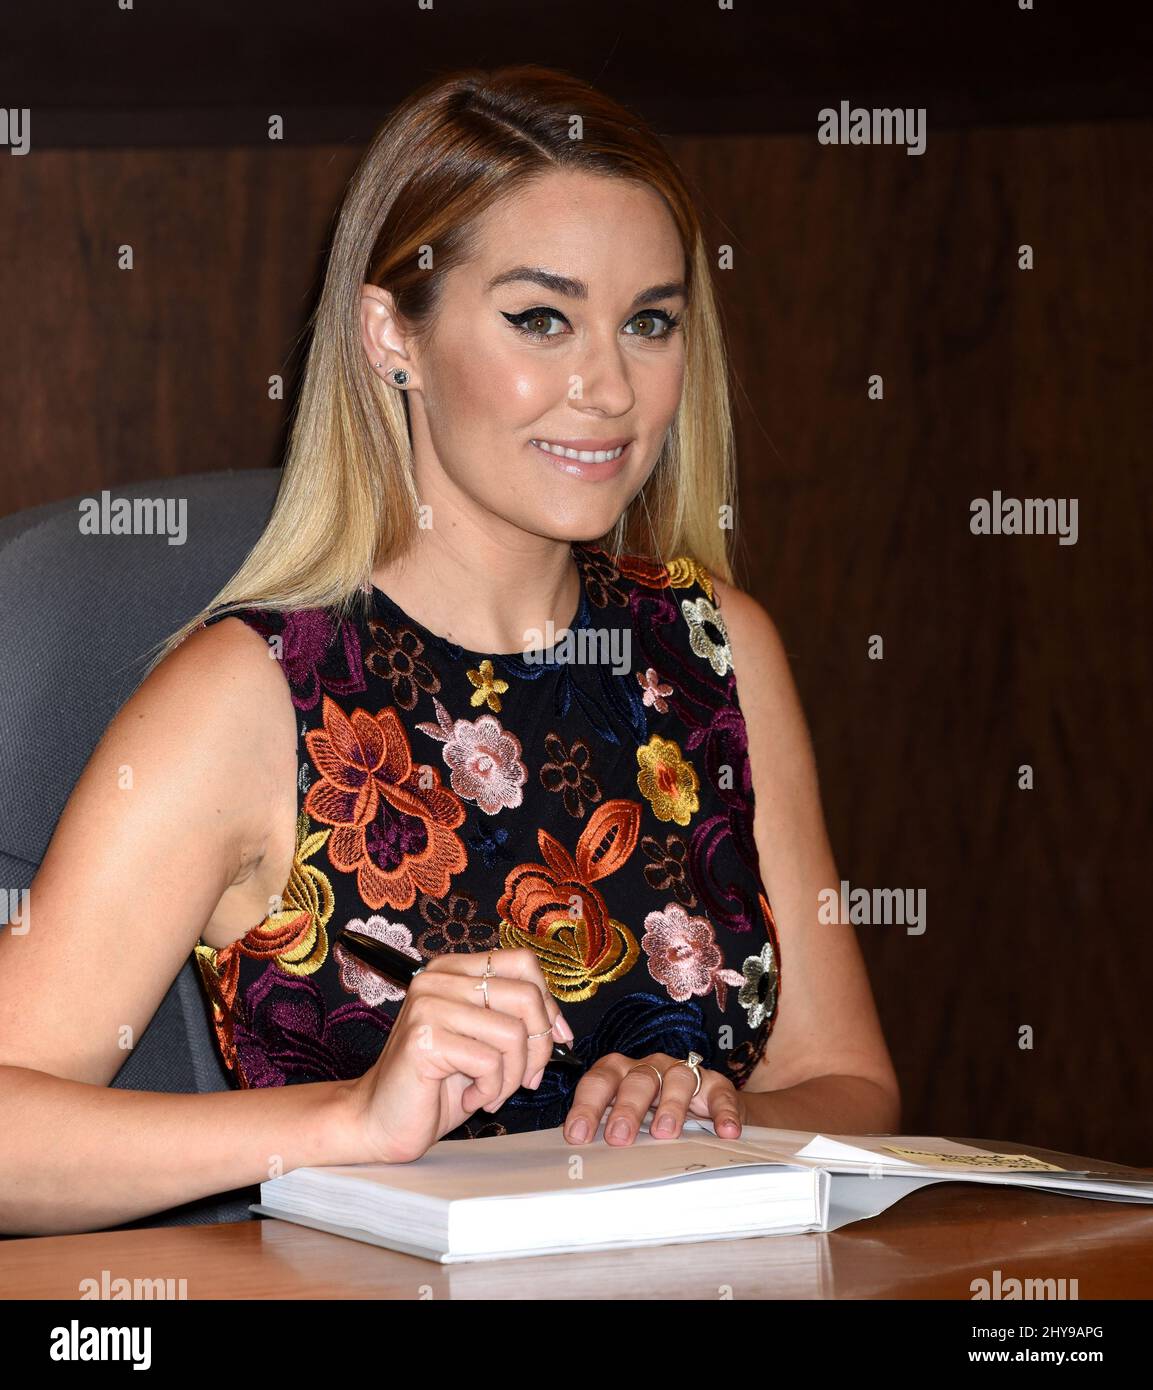 Lauren Conrad signing her book Celebrate held at Barnes and